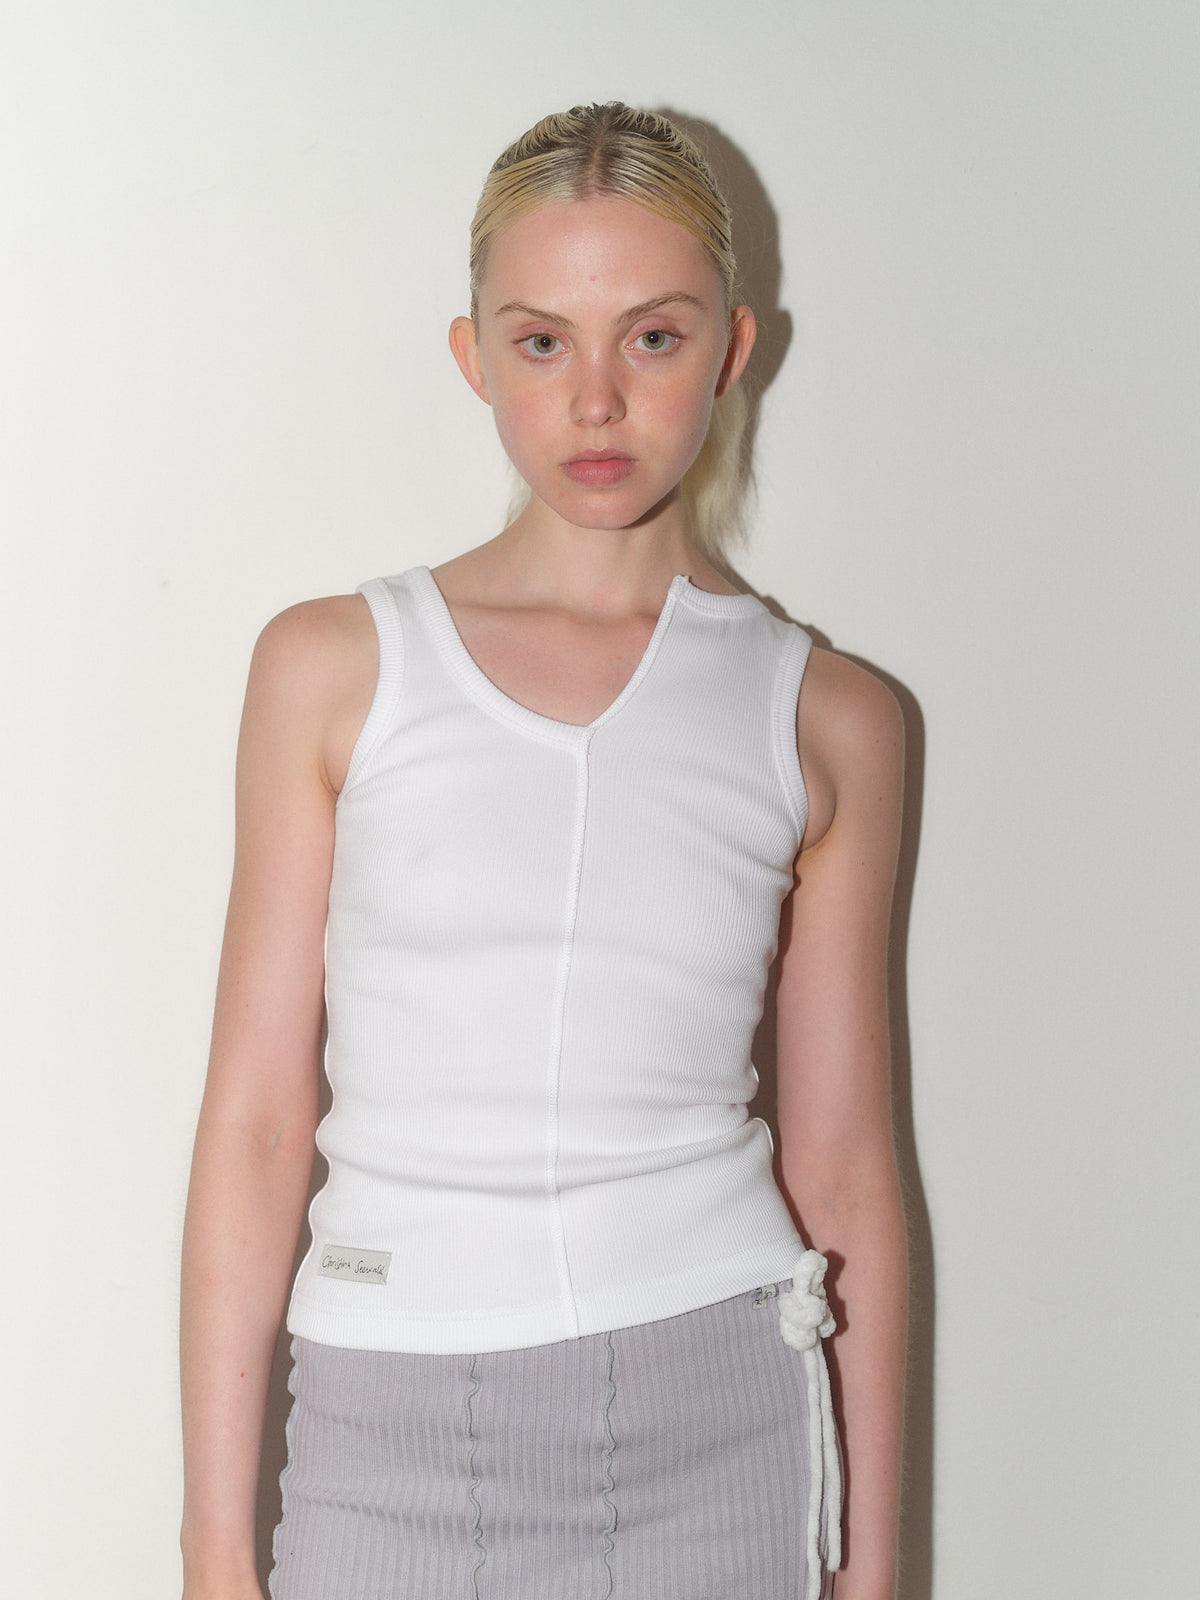 Cotton Jersey Tank Top designed by Christina Seewald. Sustainable, designed and made in Europe.